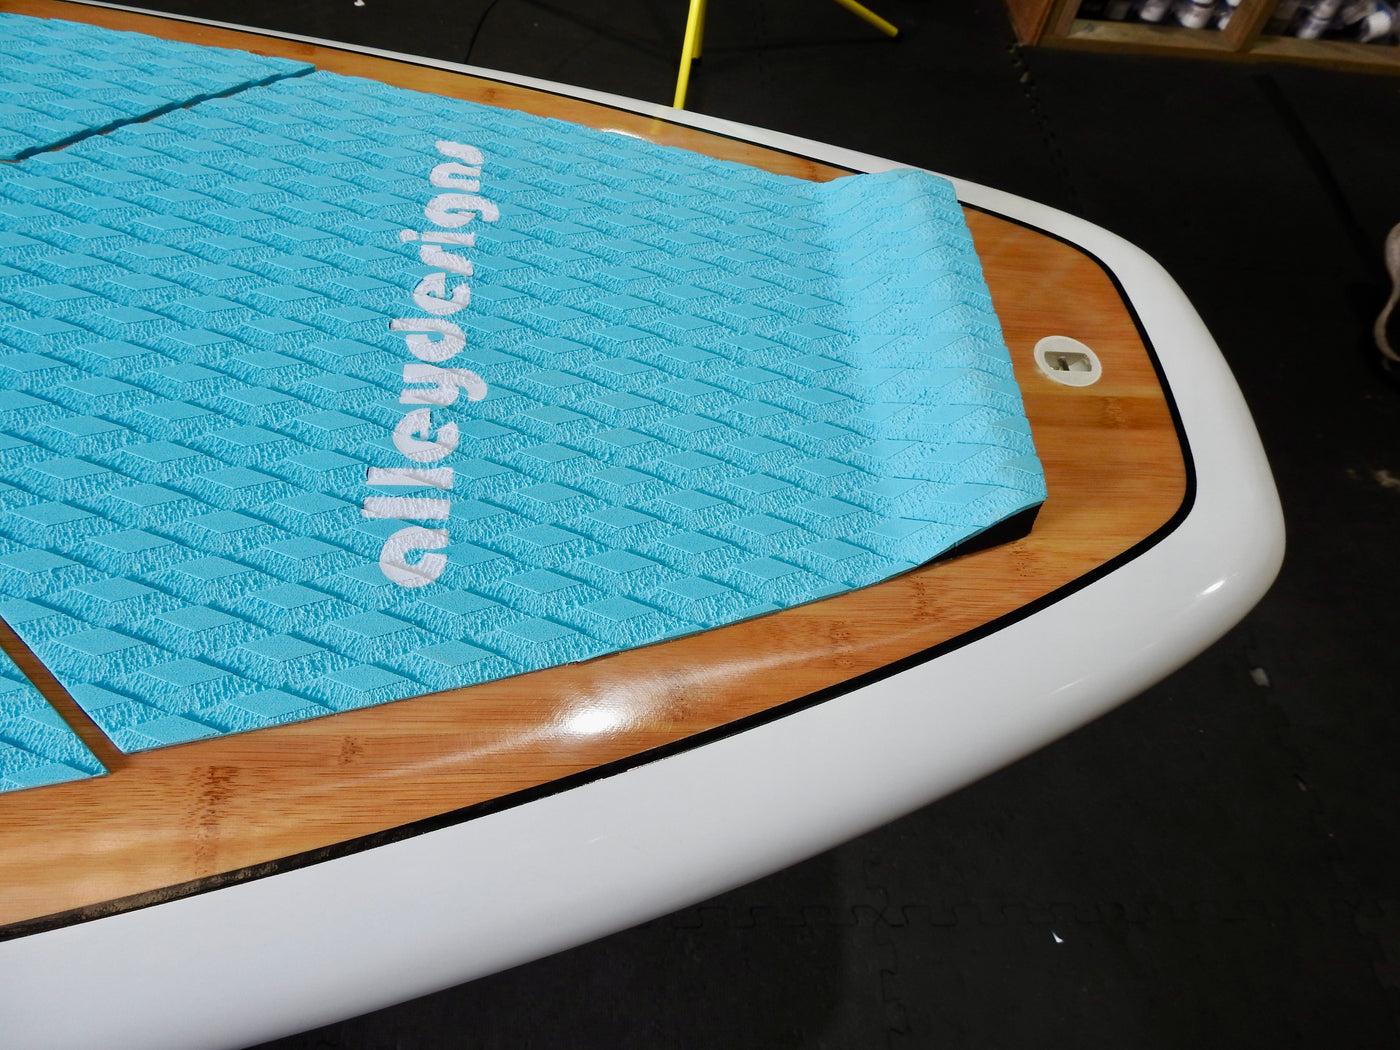 10'6" x 32" Bamboo Performance Deck Teal Turtle Alleydesigns SUP 11 kg - Alleydesigns  Pty Ltd                                             ABN: 44165571264